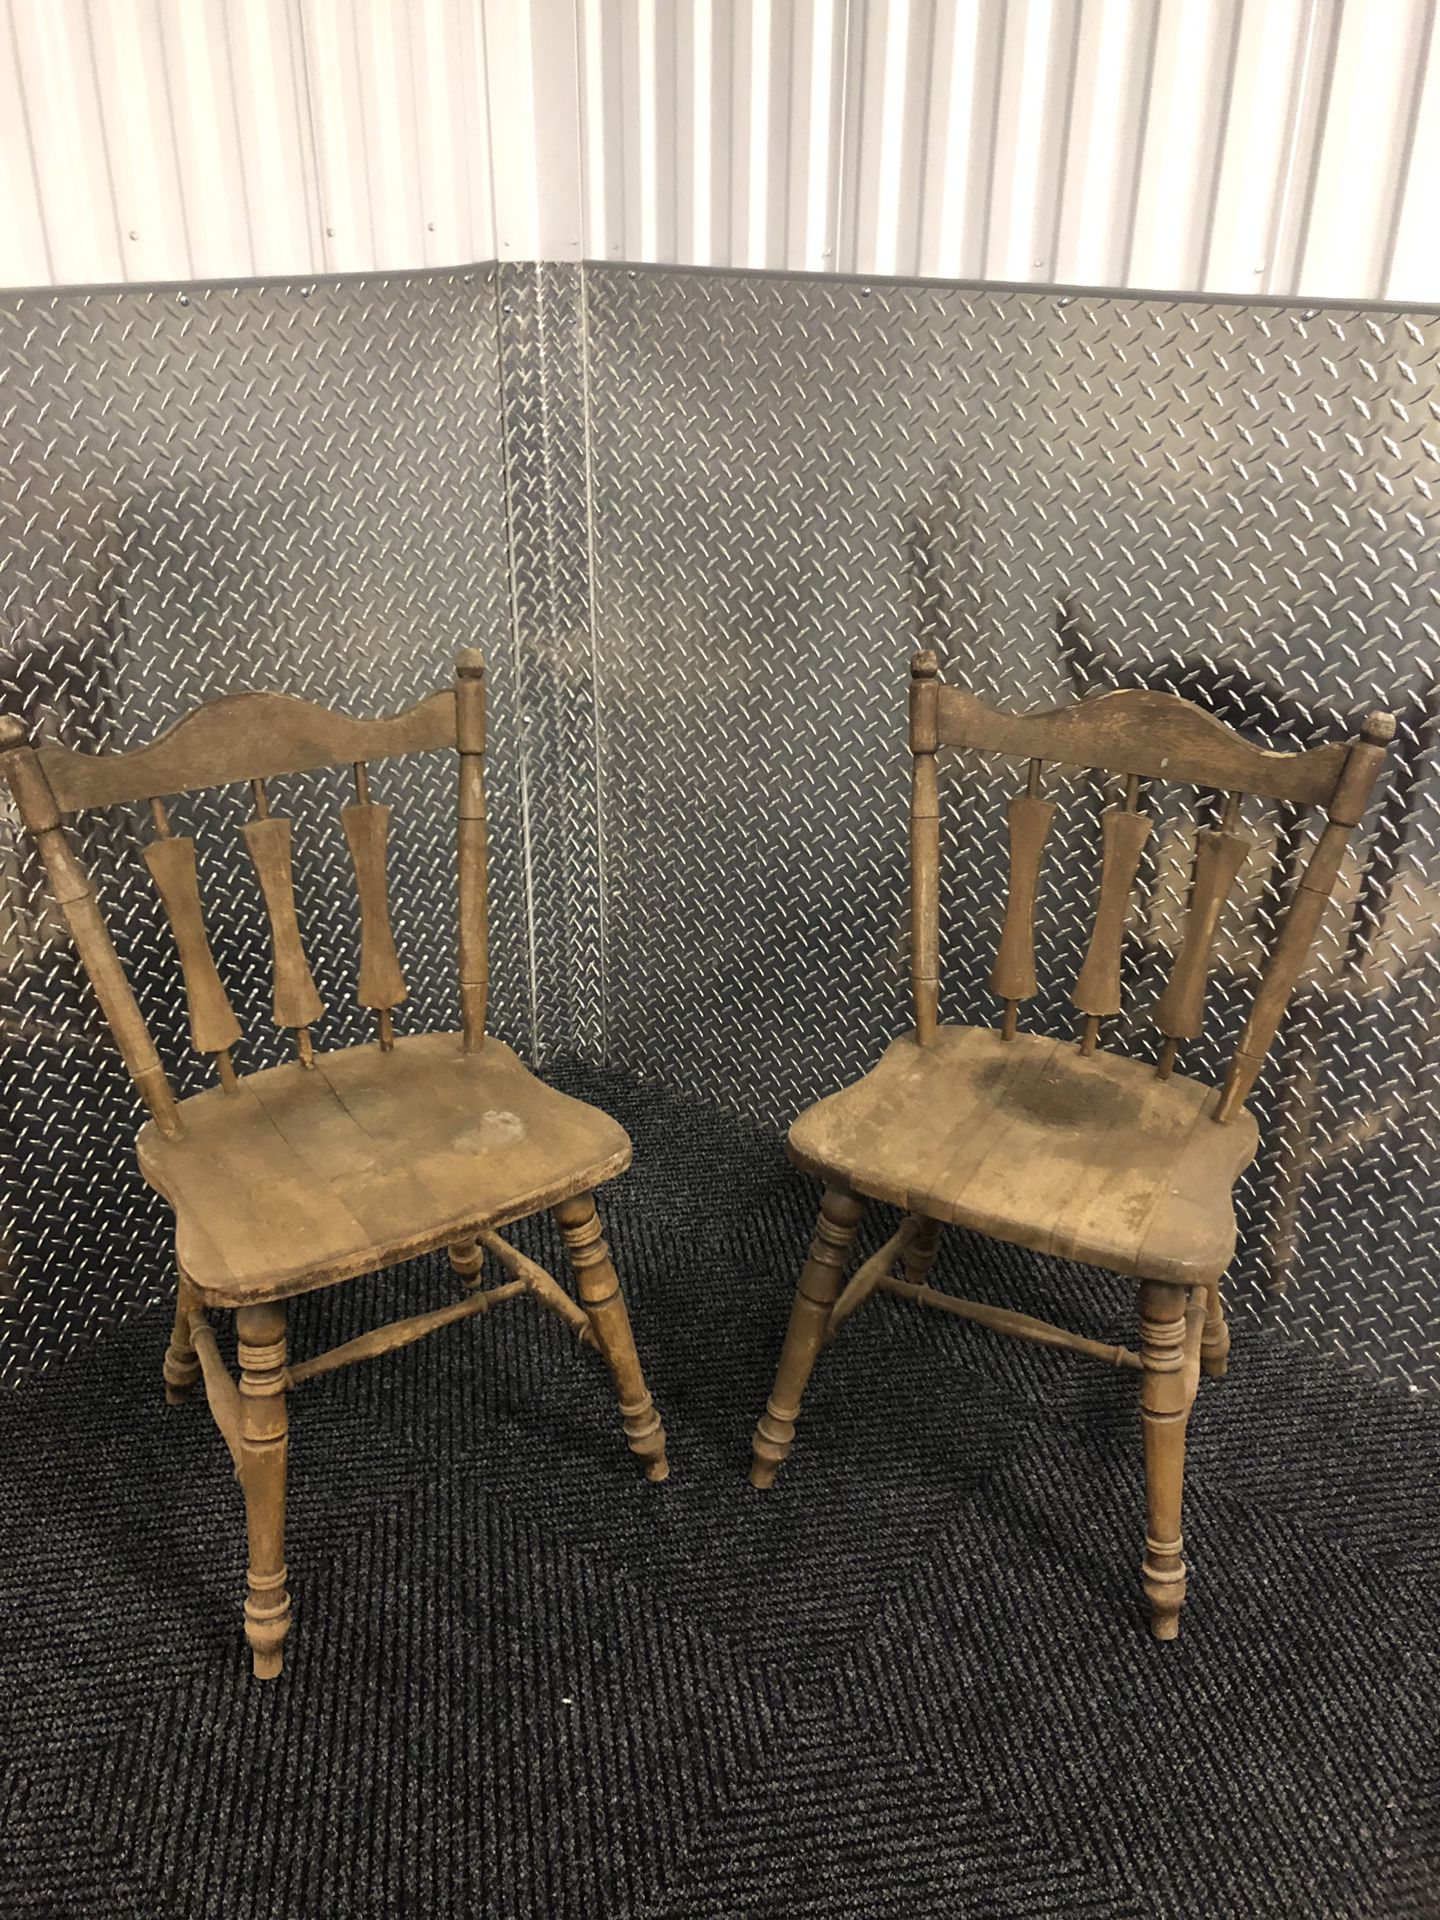 Three chairs wooden antique